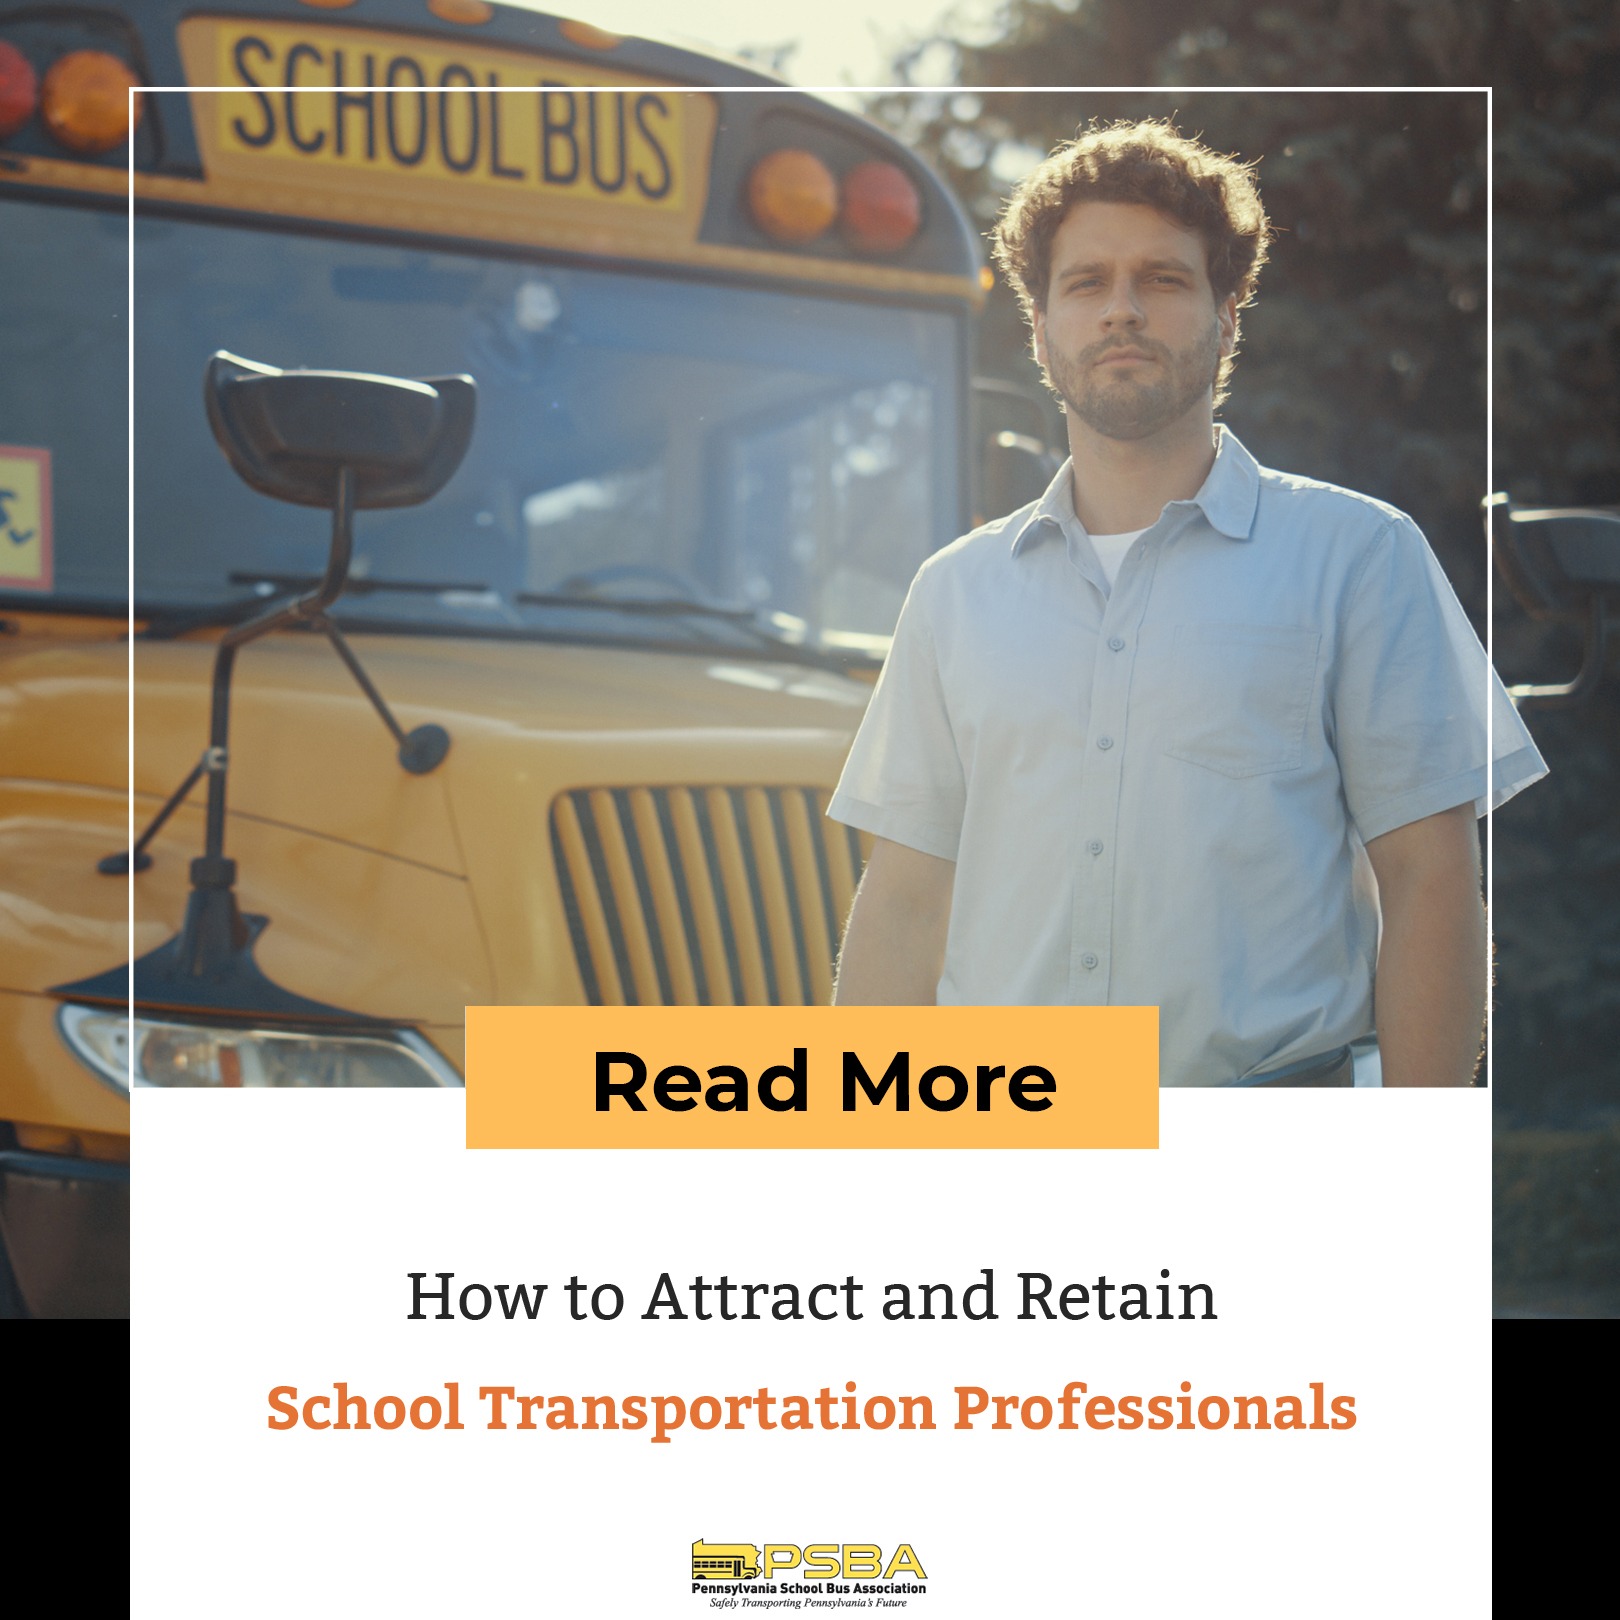 How to Attract and Retain School Transportation Professionals